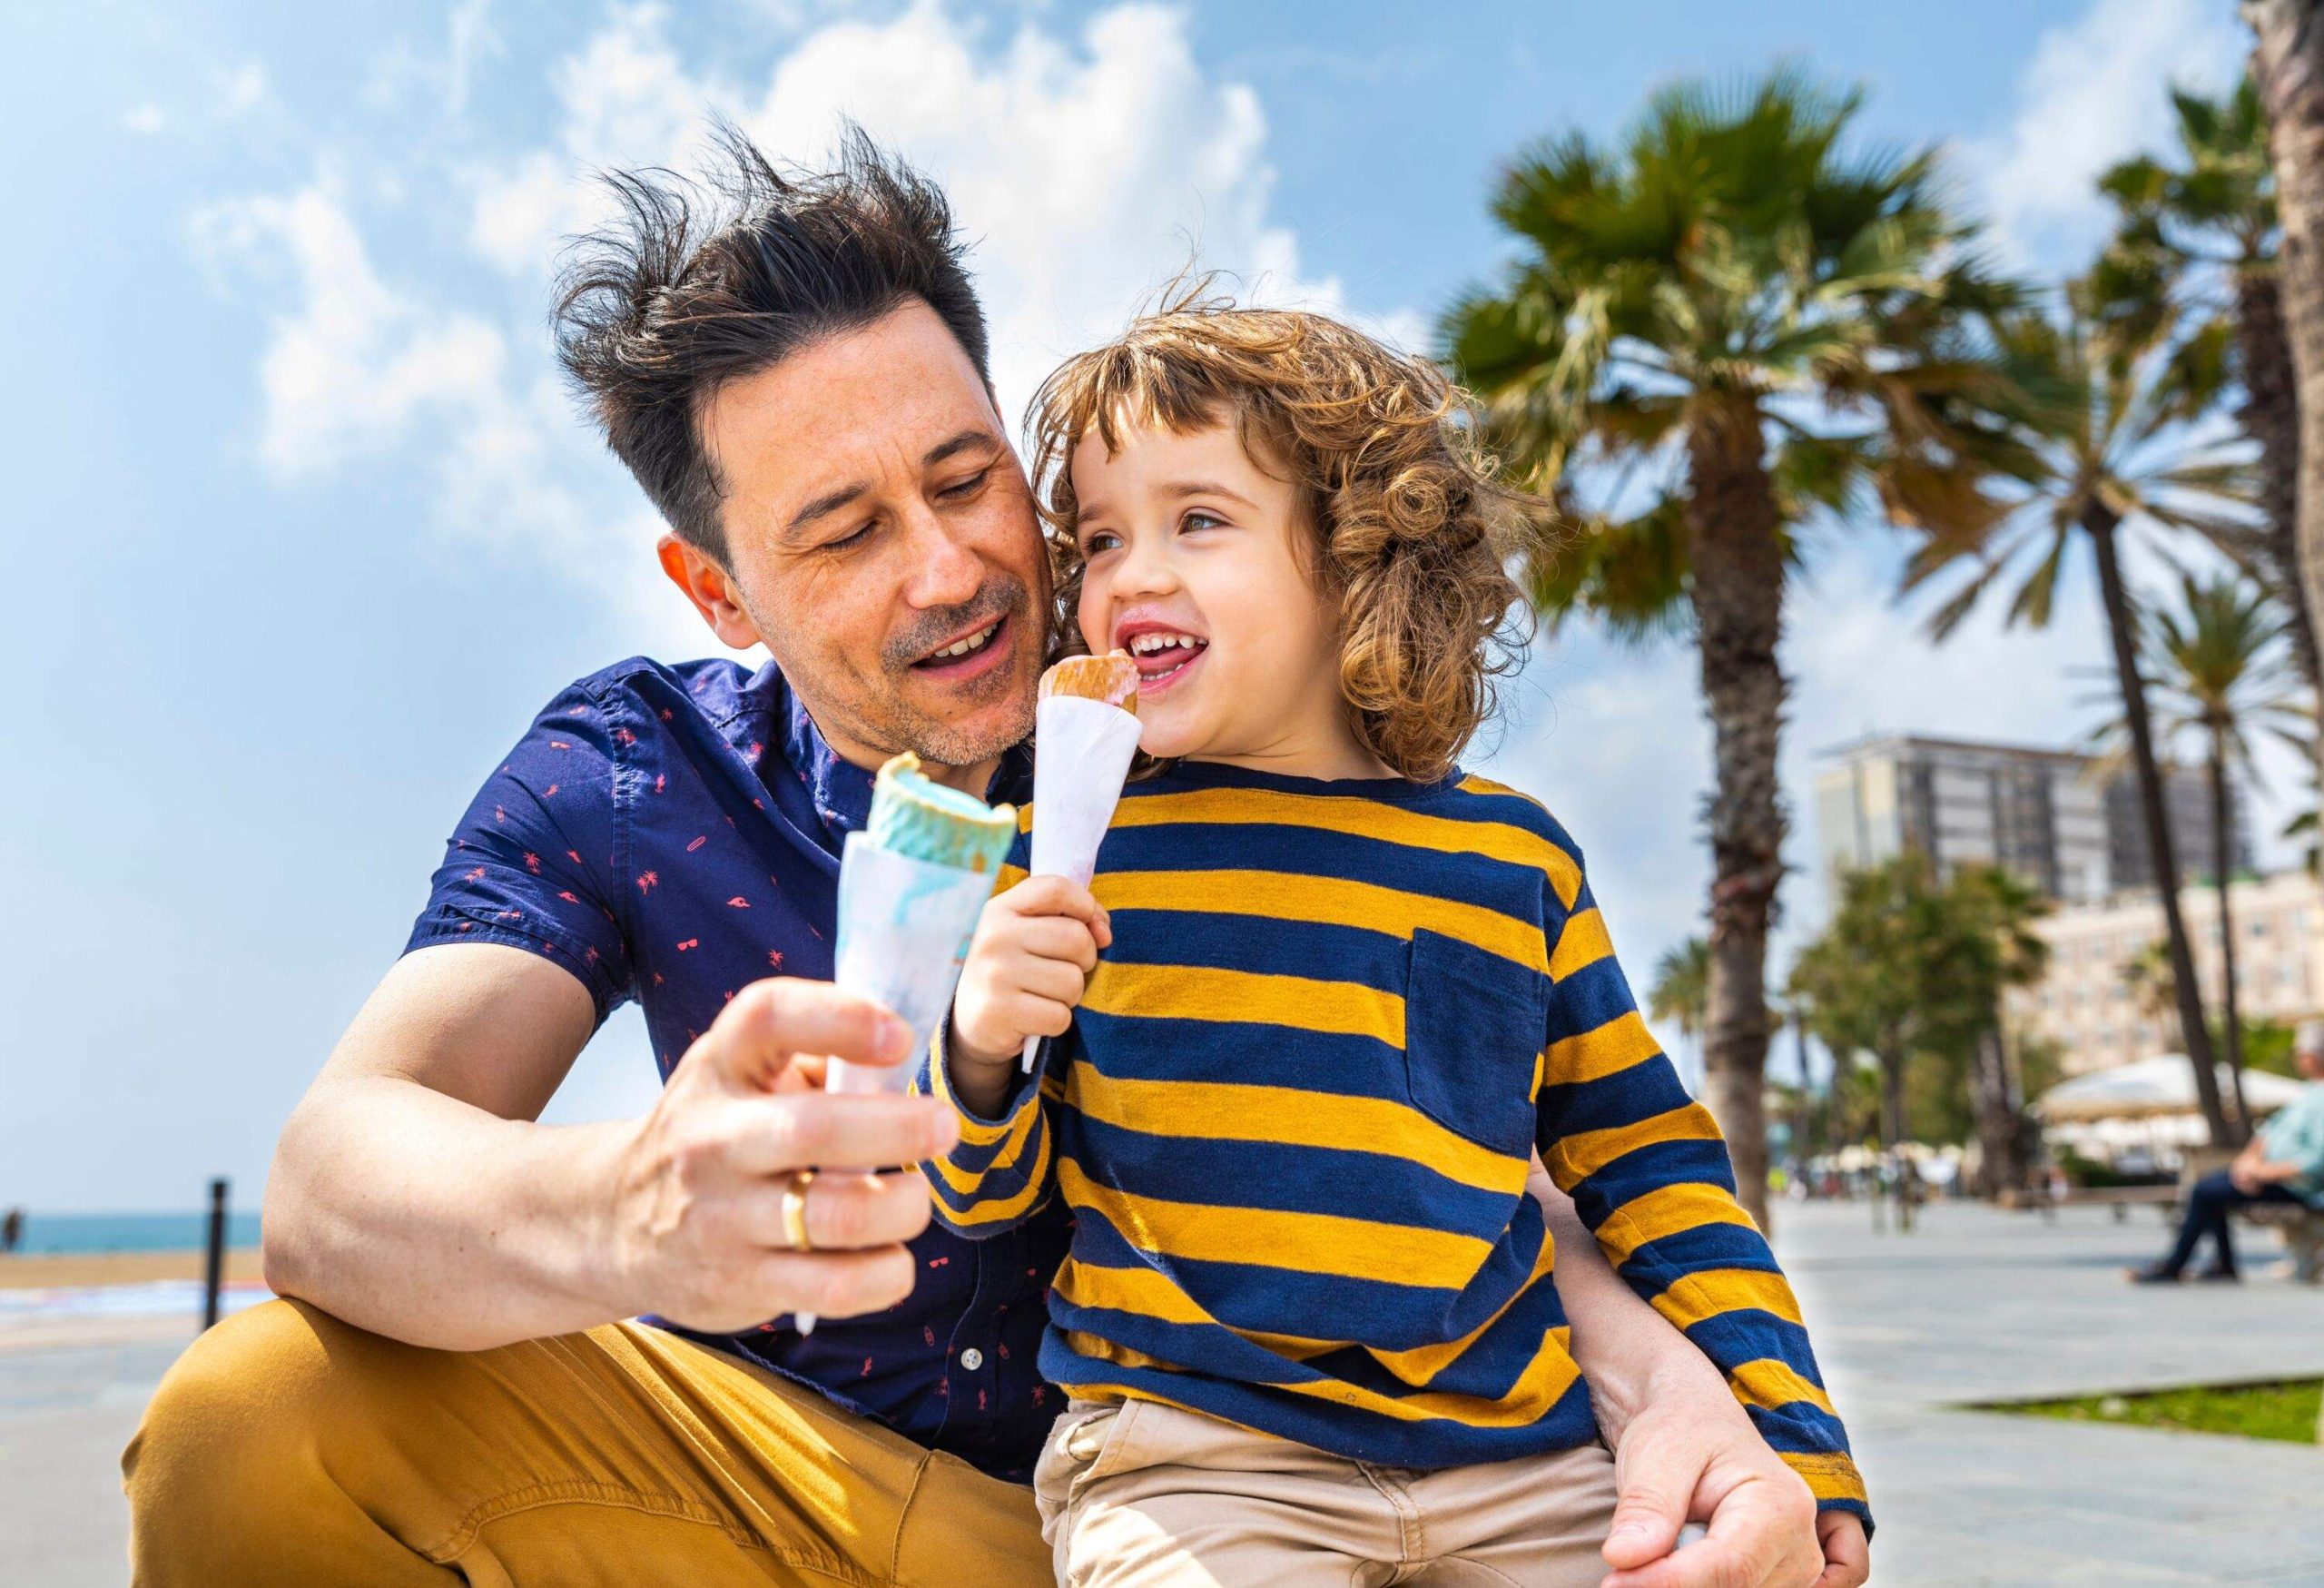 A man and a boy enjoying ice cream on a beach with palmtrees in the background